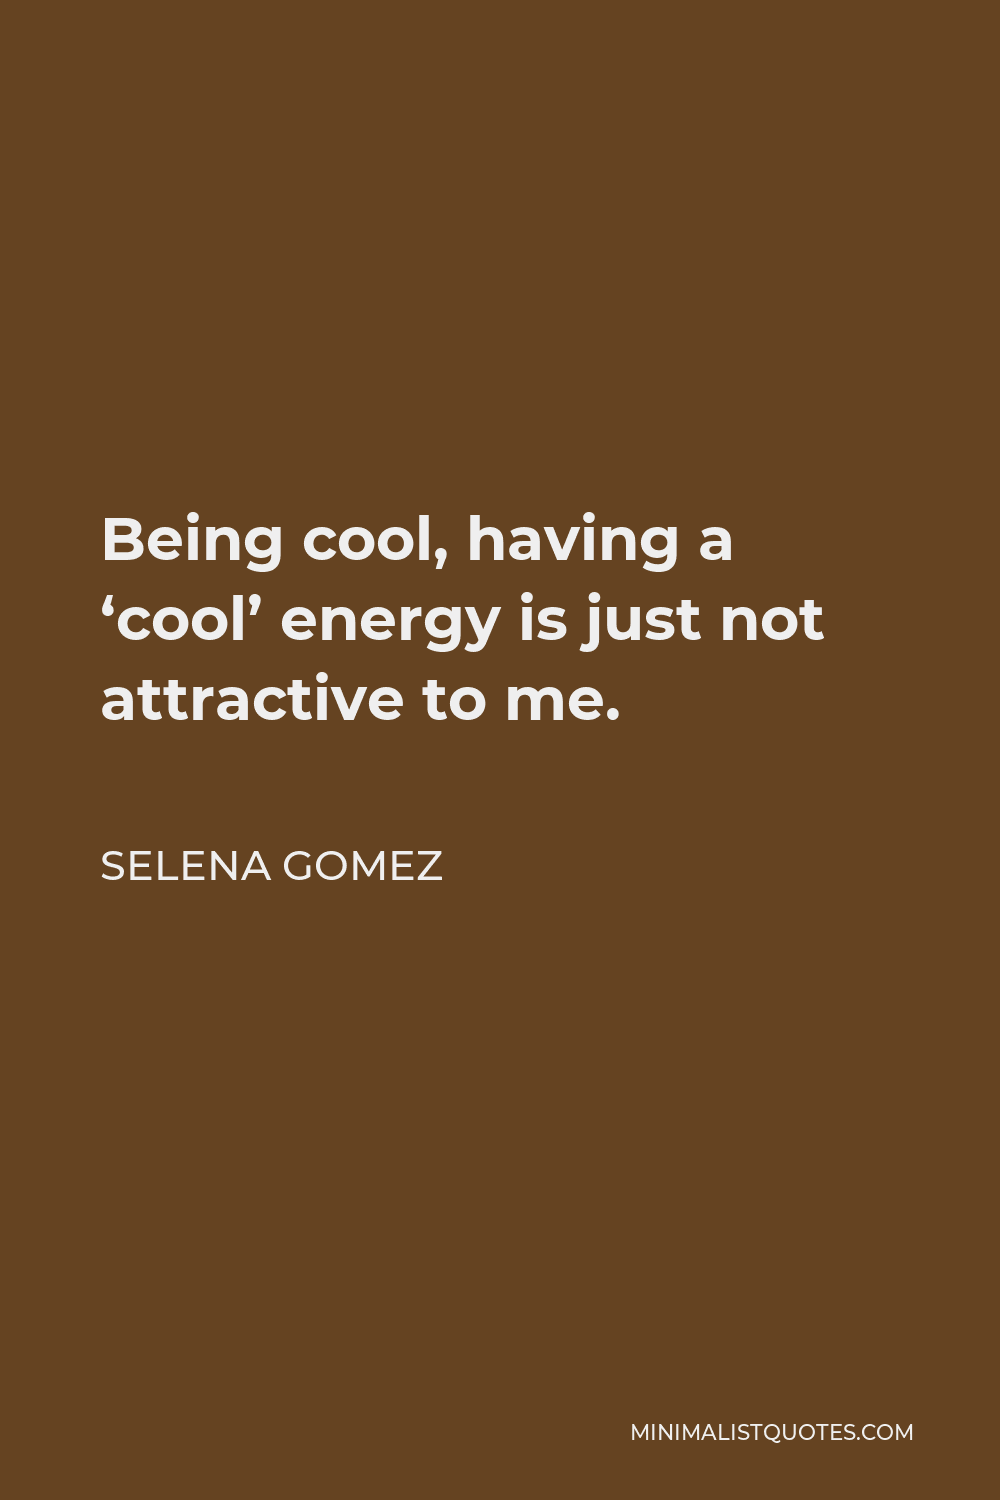 Selena Gomez Quote - Being cool, having a ‘cool’ energy is just not attractive to me.